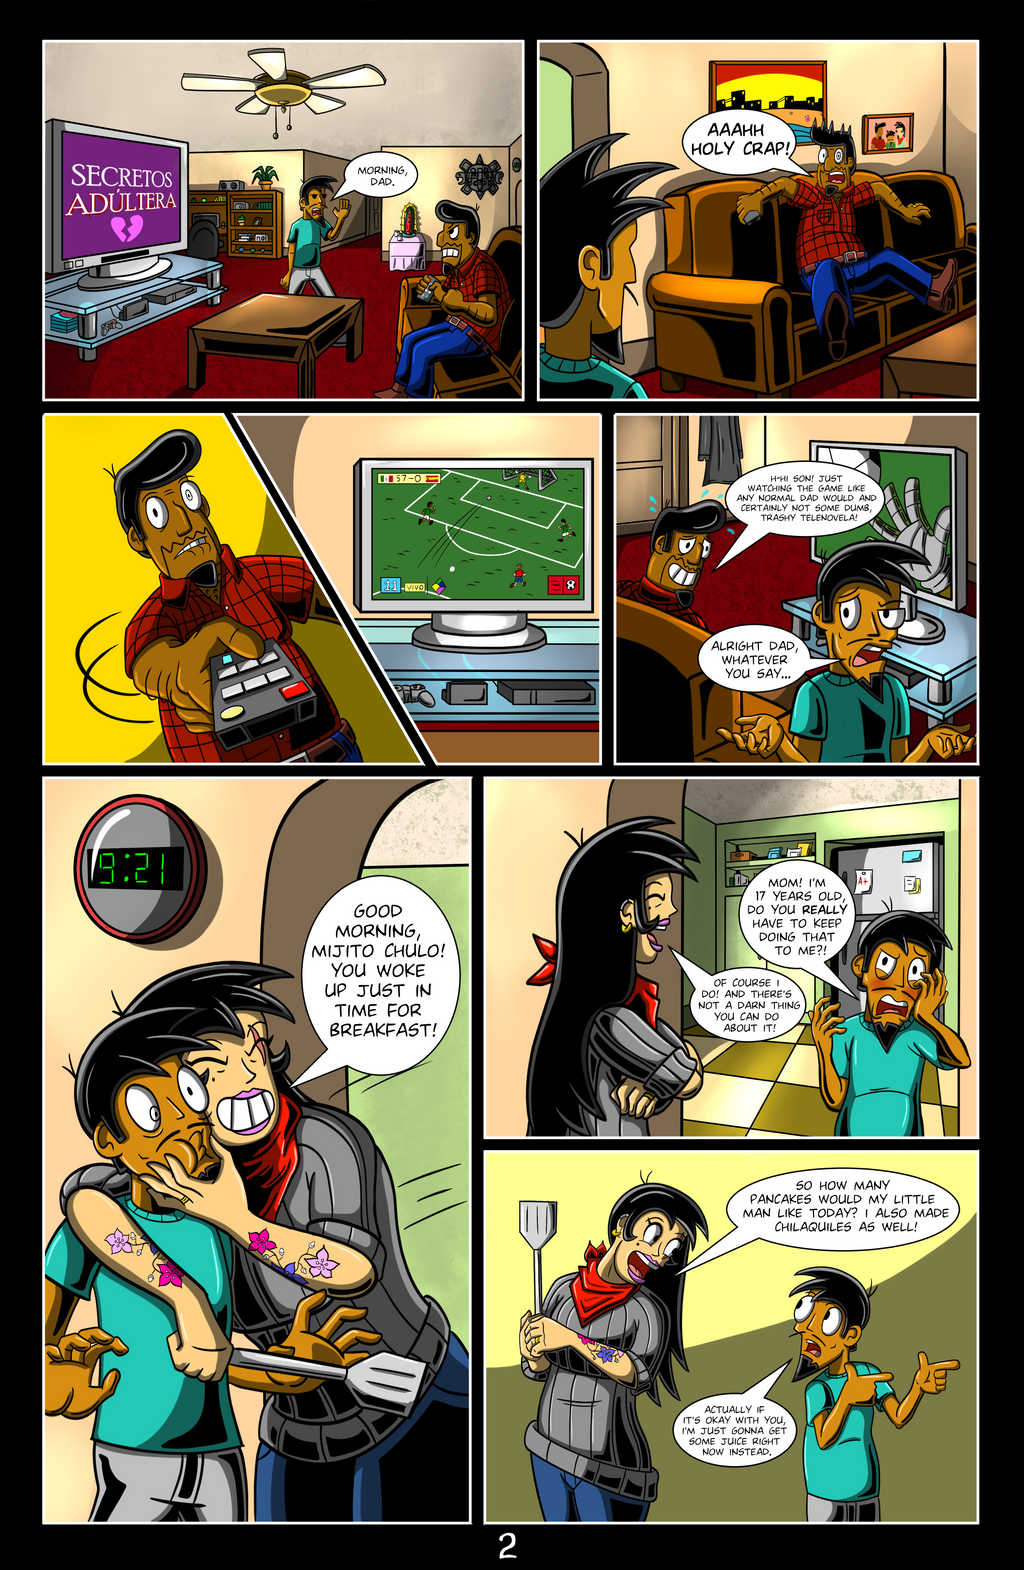 The of Pepito and Juan #2 (p. 2) by on DeviantArt